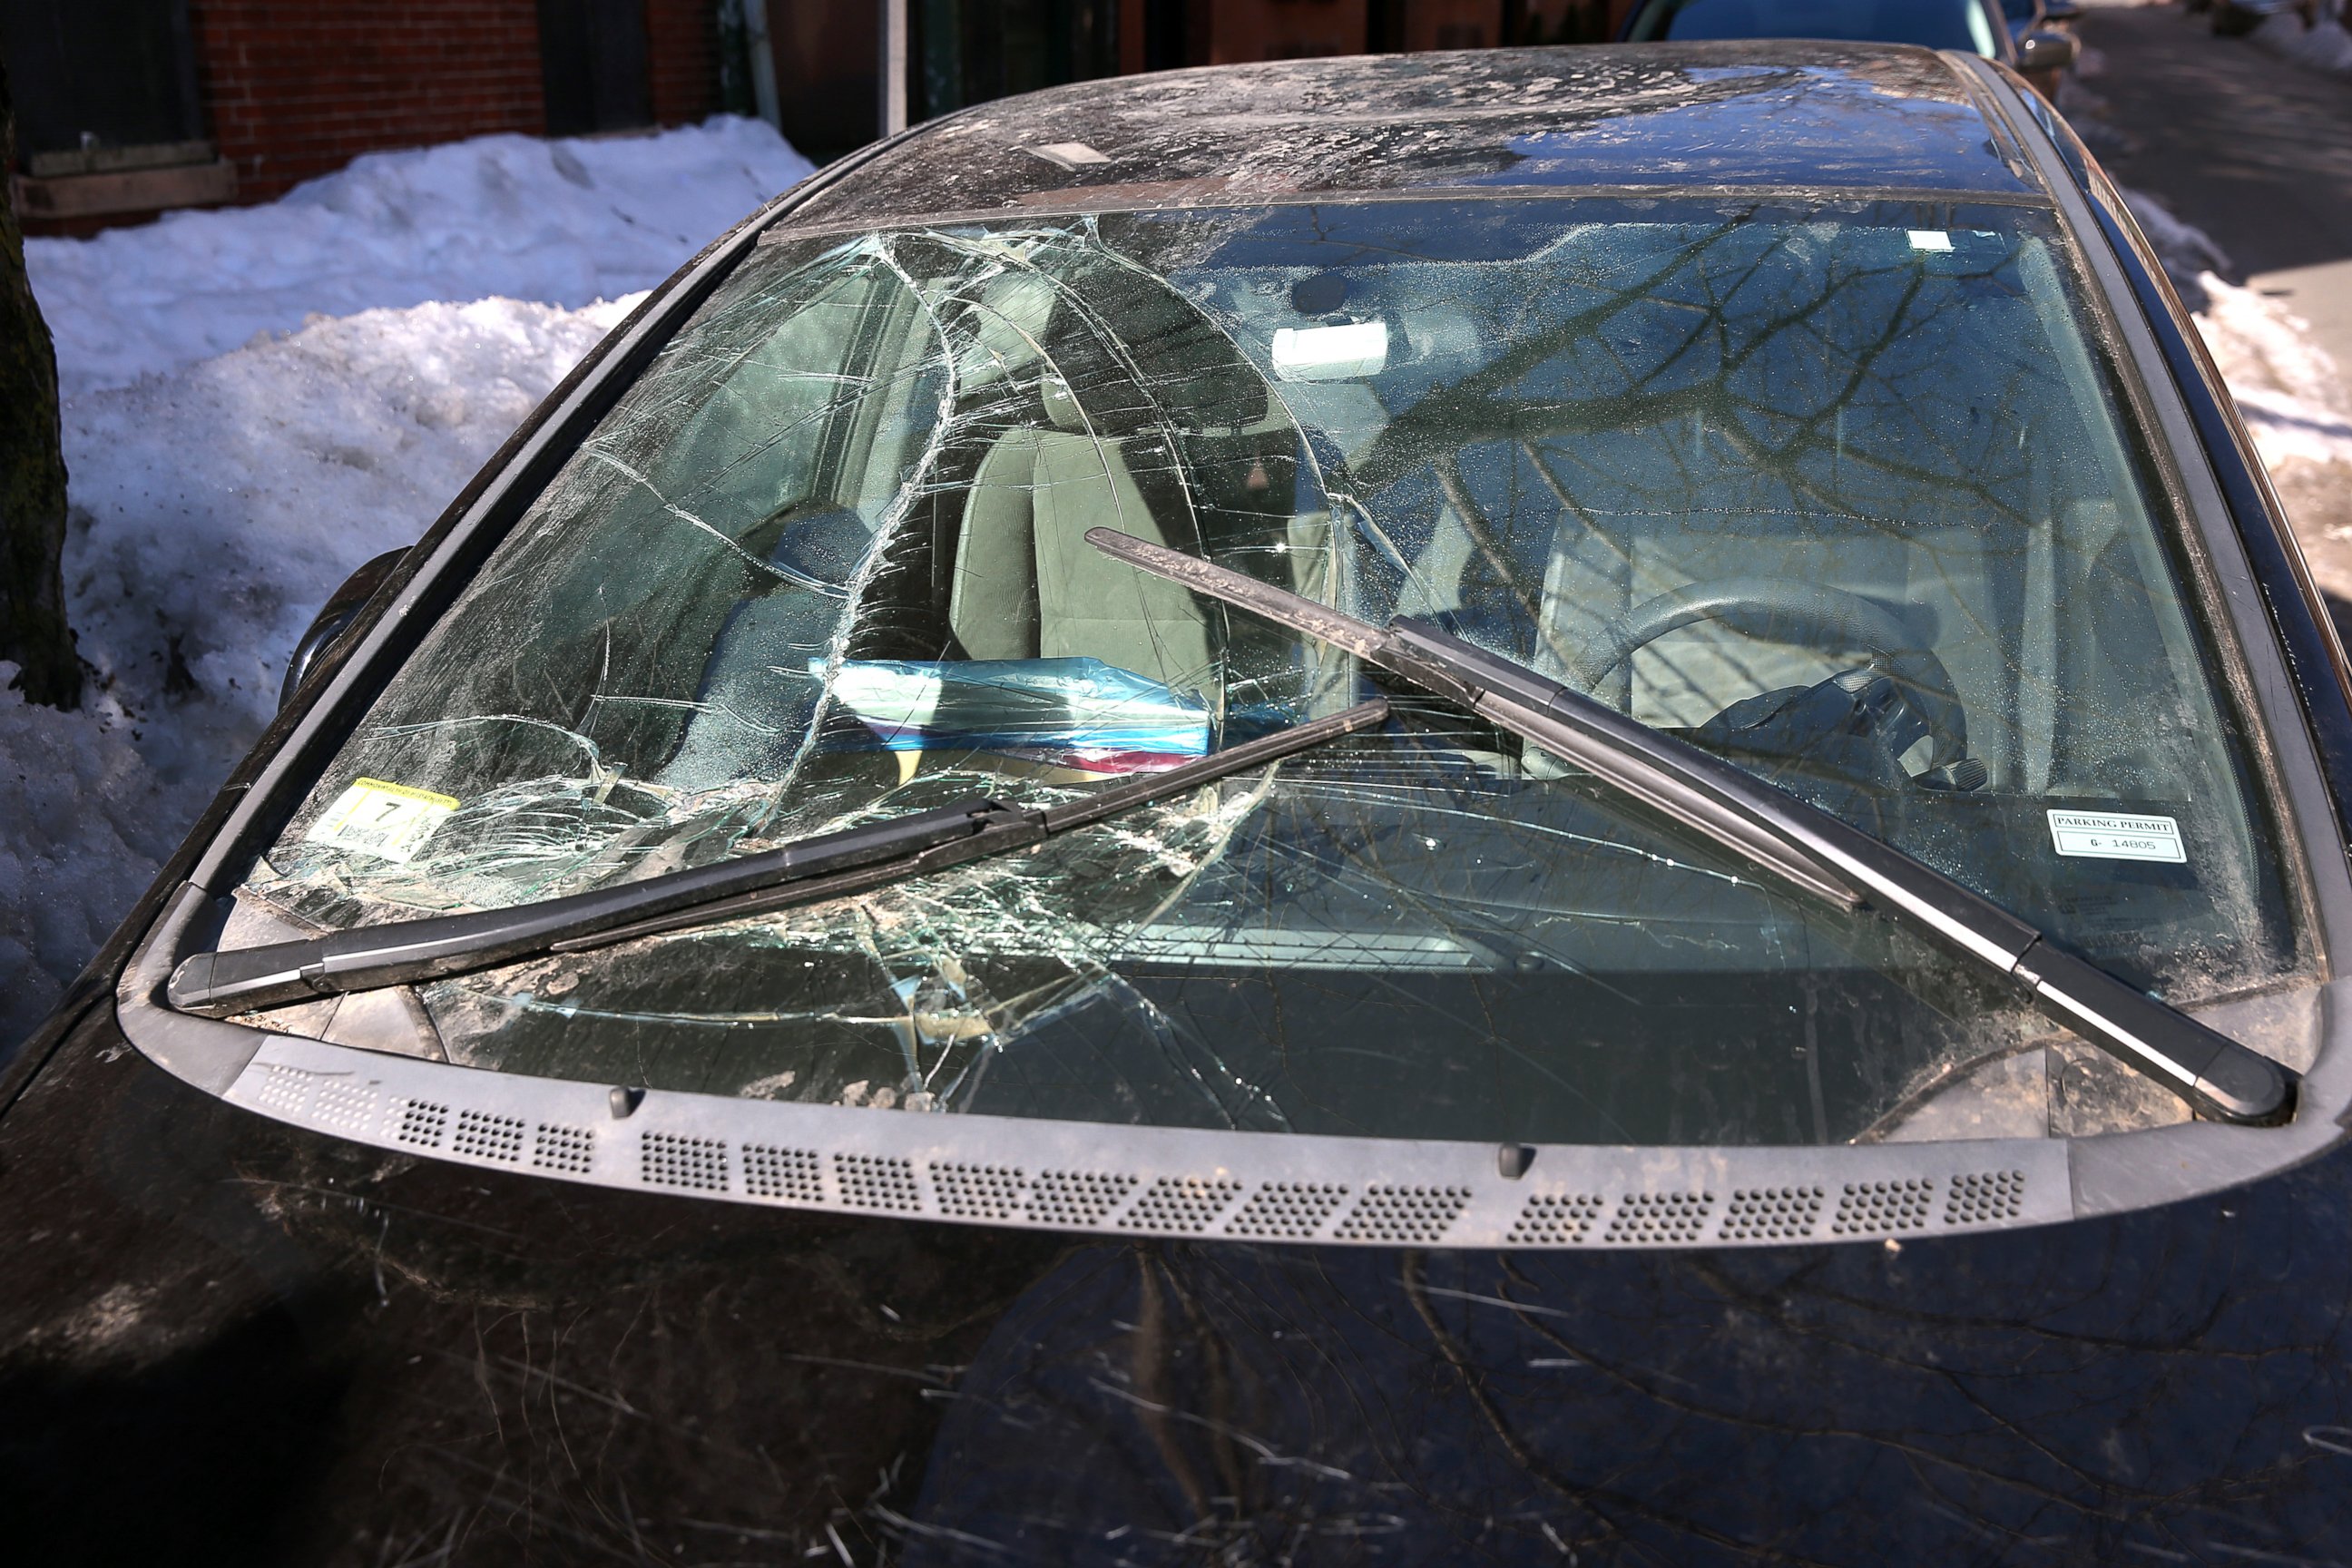 PHOTO: Jillian Tenen's car is seen parked on Isabella Street in Boston, March 18, 2015, showing damages from being trapped under snow all winter.